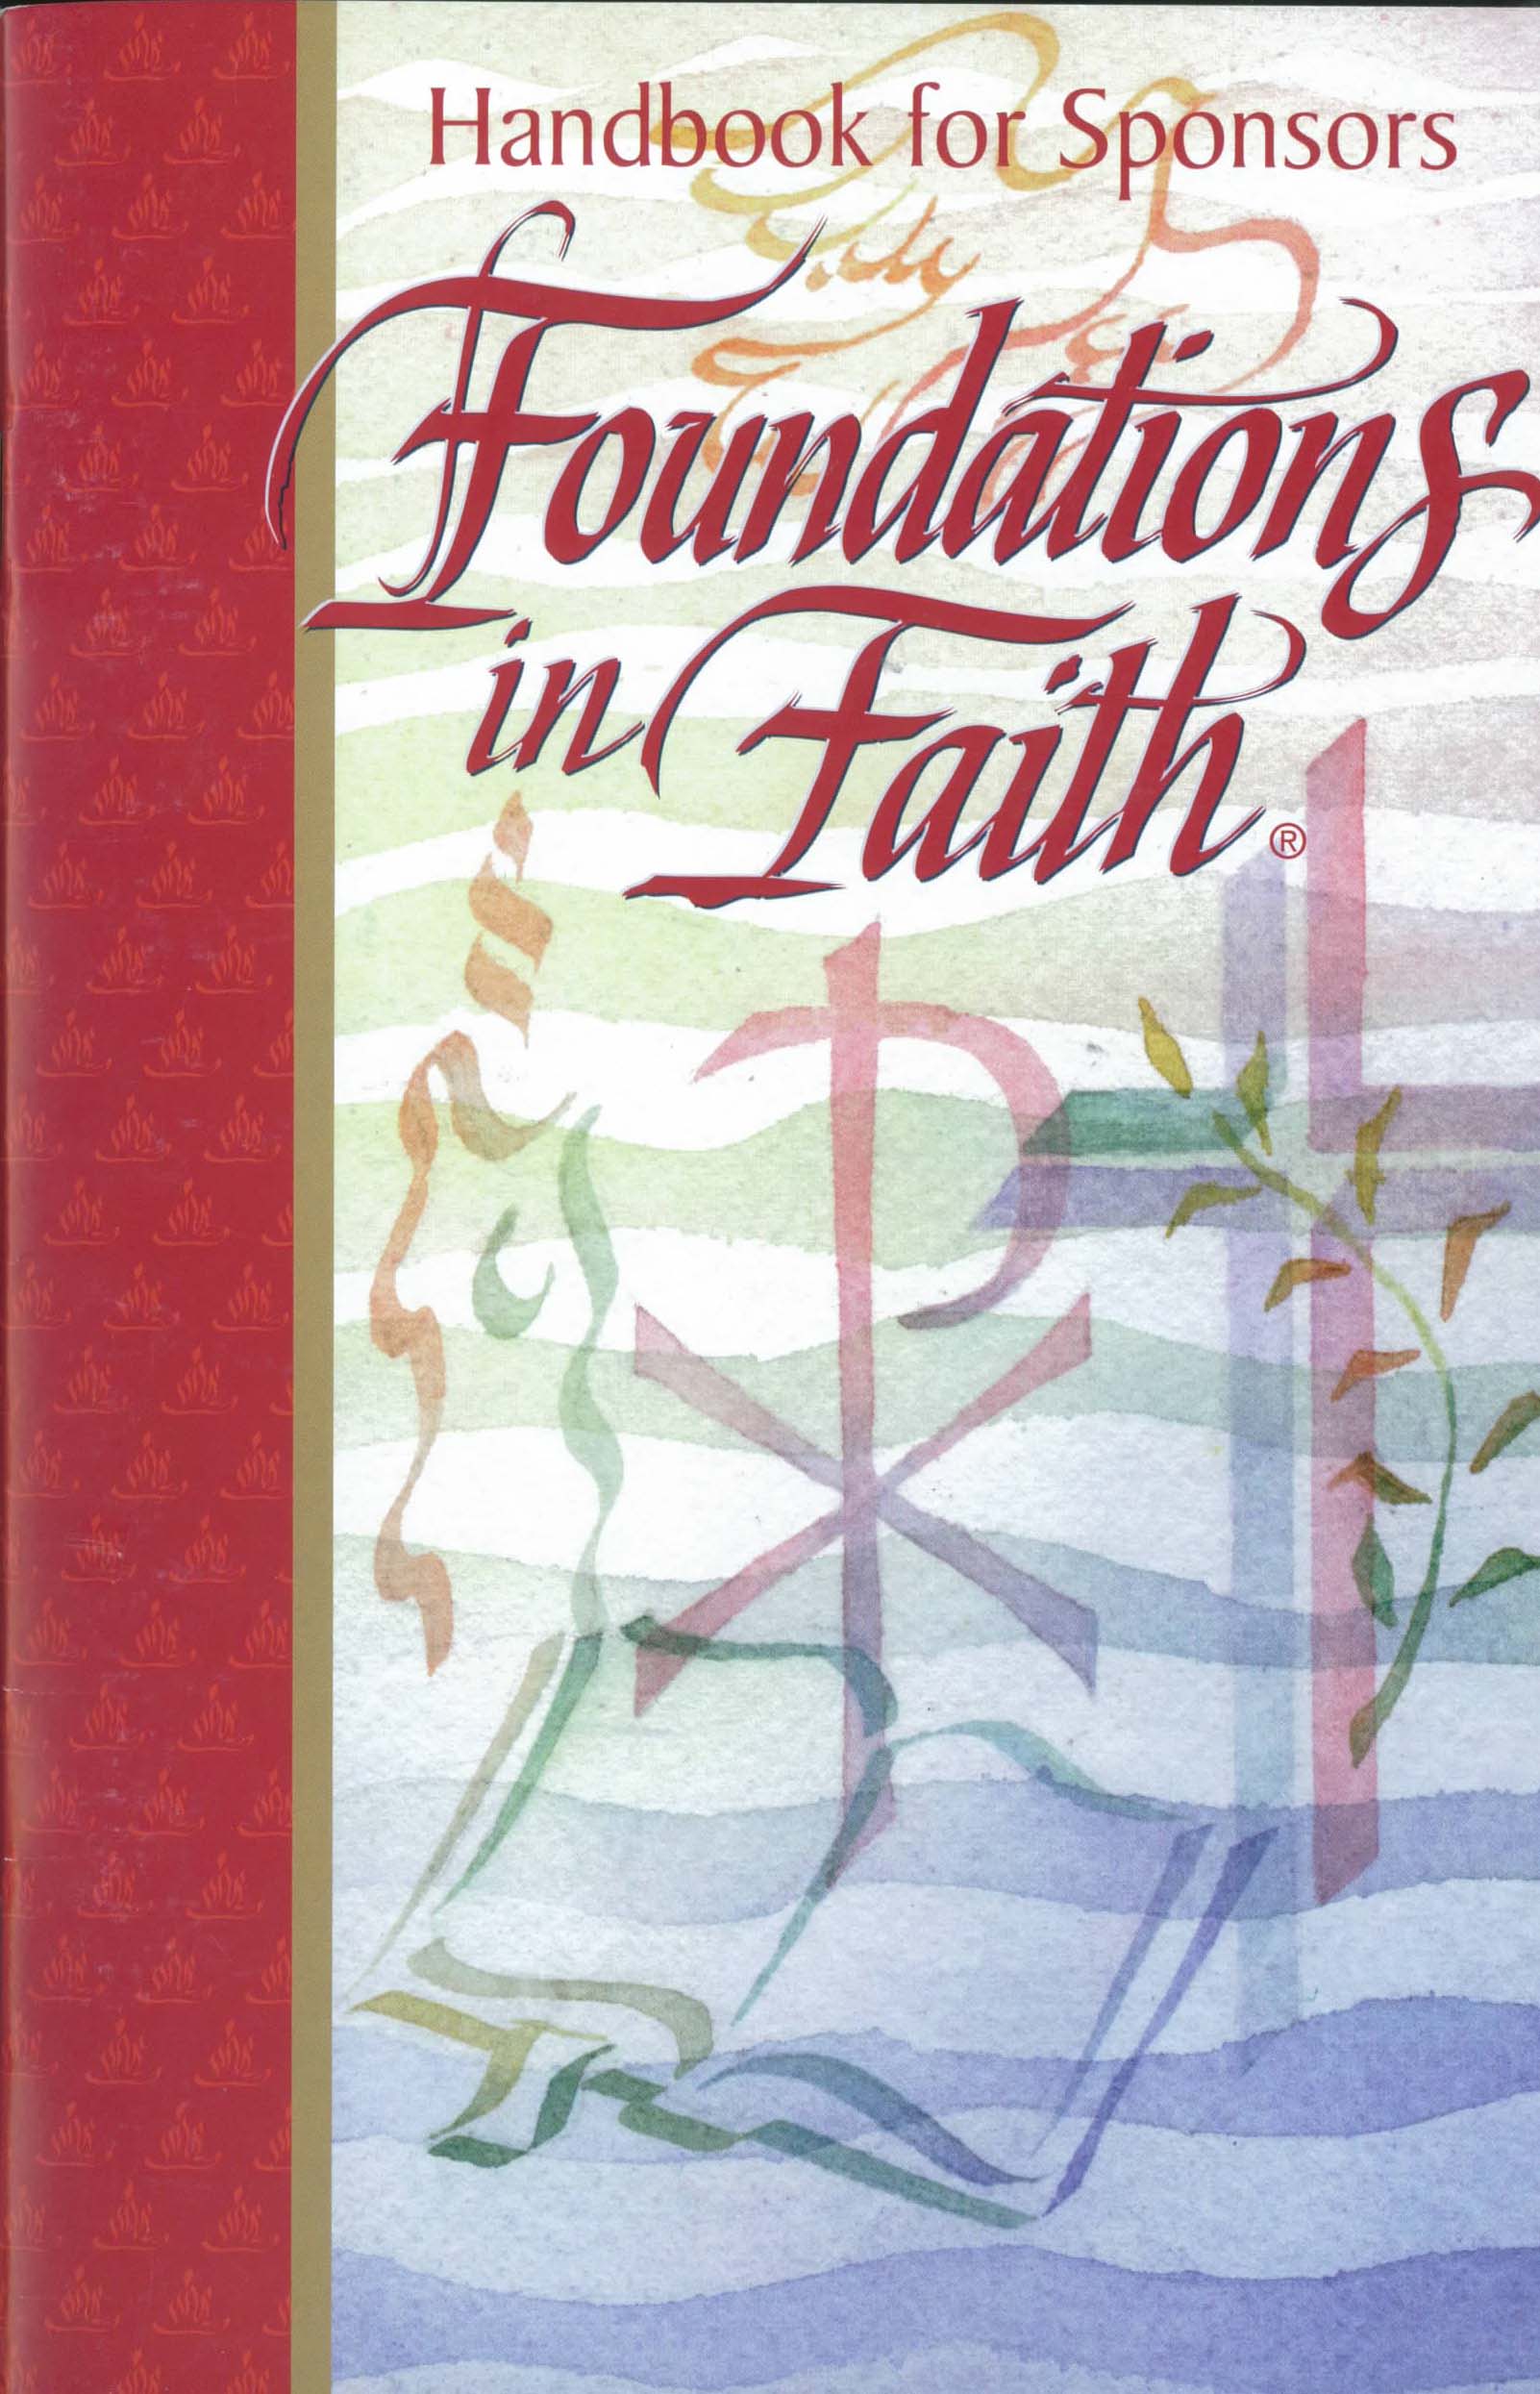 Foundations In Faith: Handbook for Sponsors by RCL Benziger 347-9780782907544